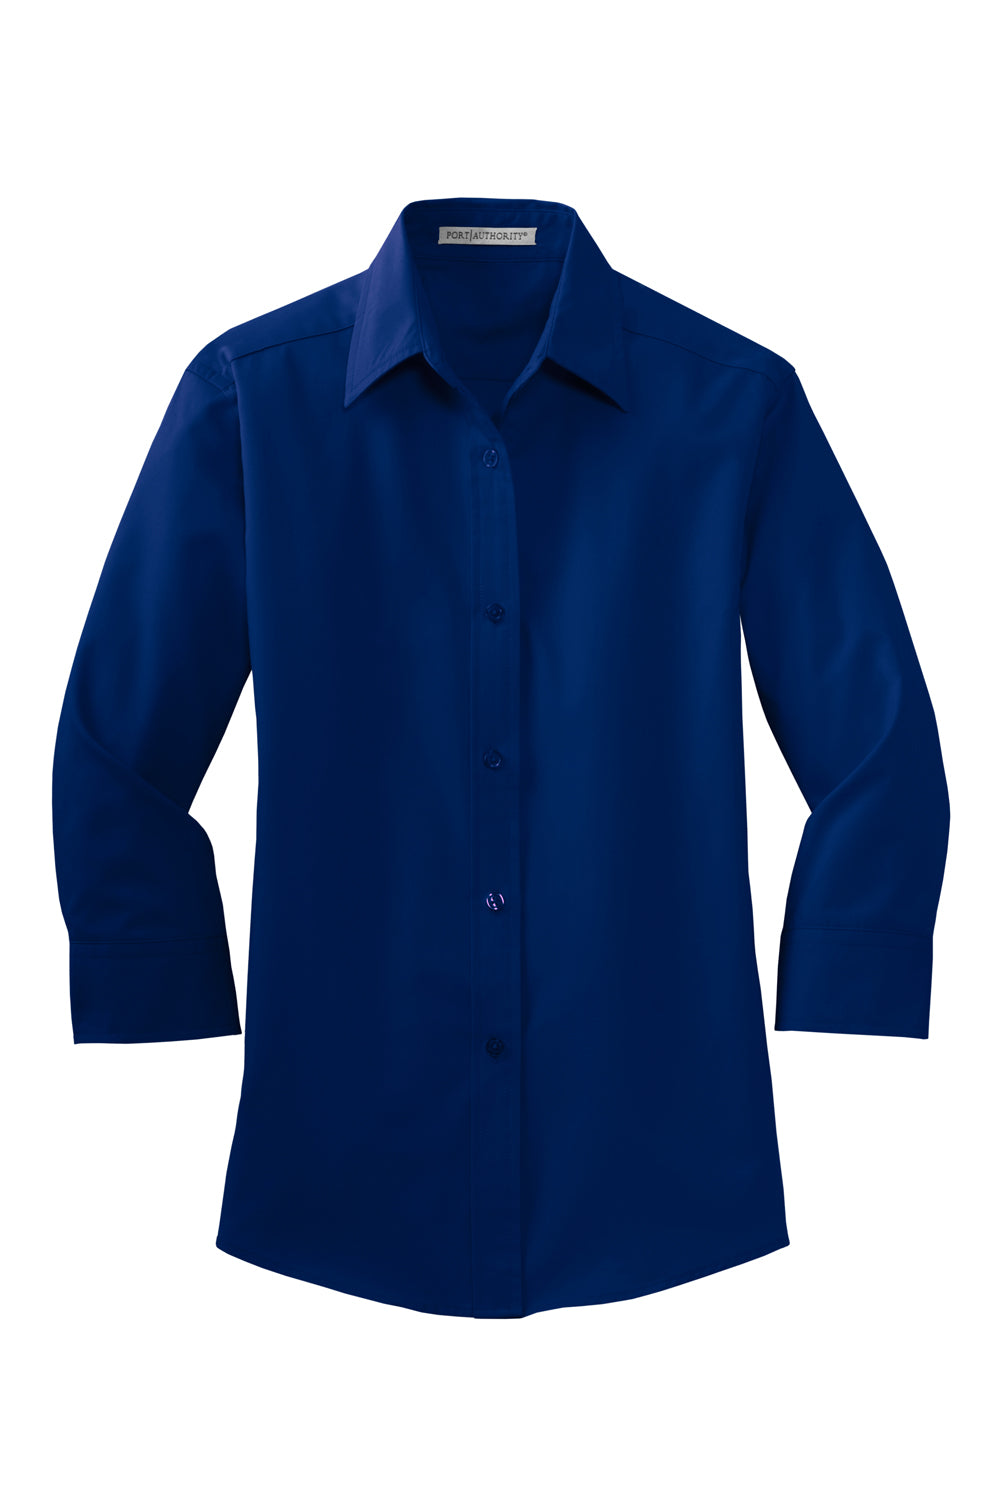 Port Authority L612 Womens Easy Care Wrinkle Resistant 3/4 Sleeve Button Down Shirt Mediterranean Blue Flat Front